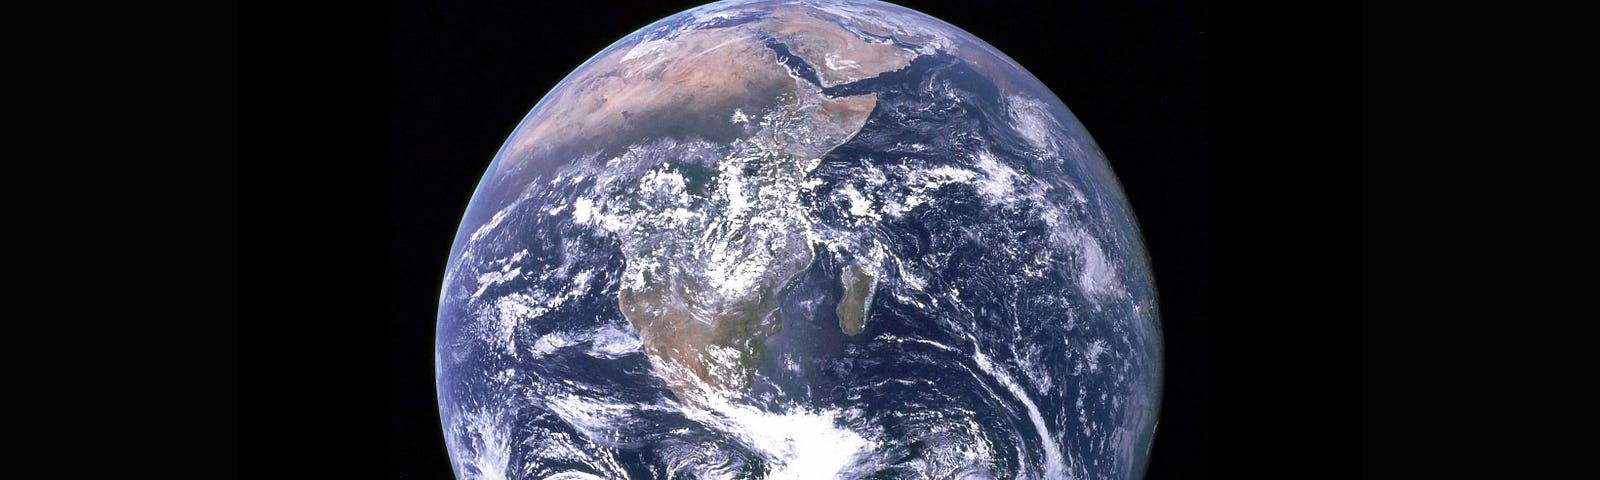 NASA picture of planet Earth